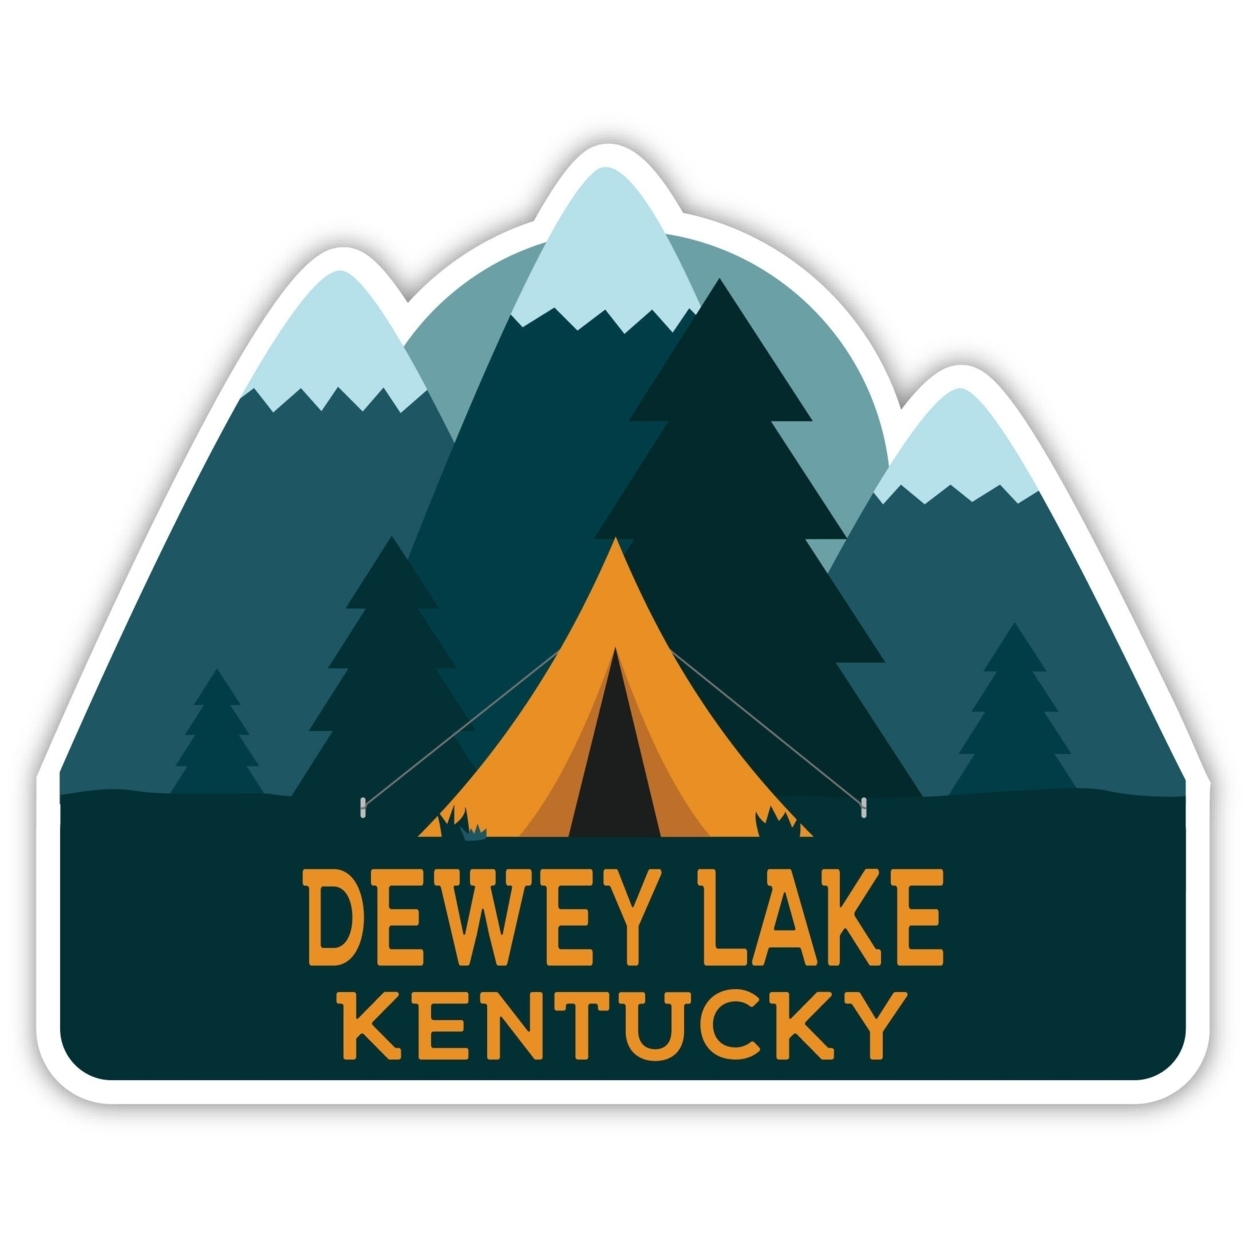 Dewey Lake Kentucky Souvenir Decorative Stickers (Choose Theme And Size) - 4-Pack, 2-Inch, Tent